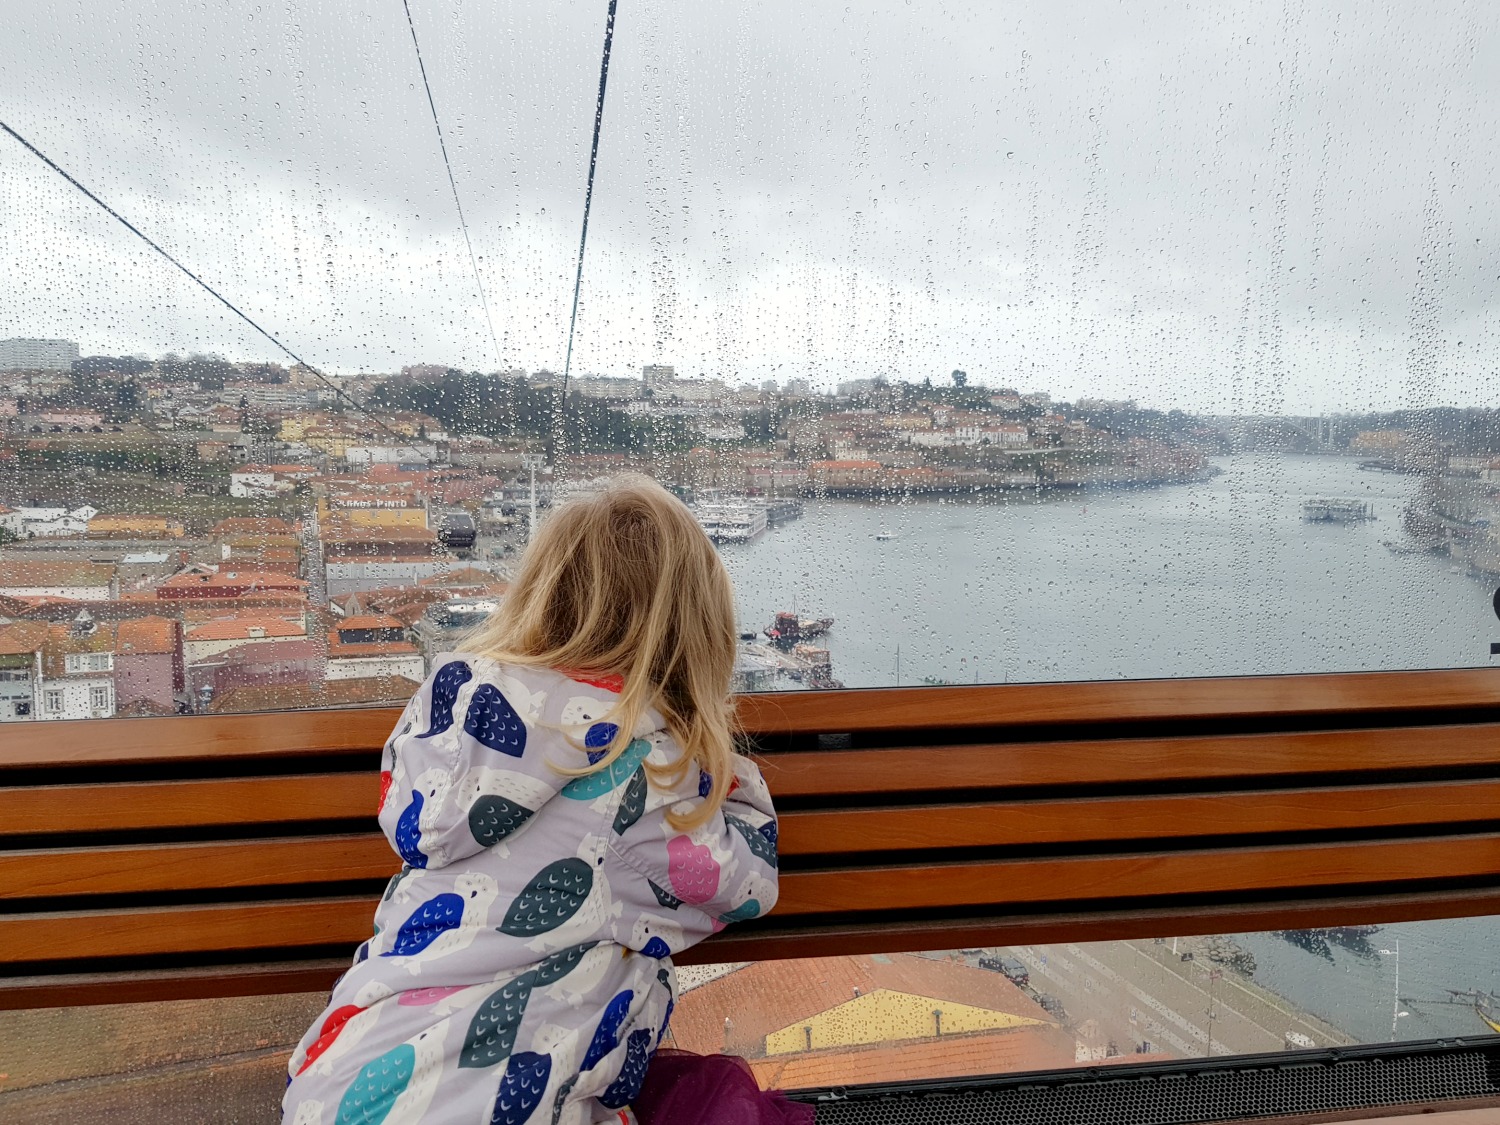 My daughter looks through the rainy window of the cable car to see the view across to the River Douro and Vila Nova de Gaia - one of the best things to do with kids in Porto, rain or shine